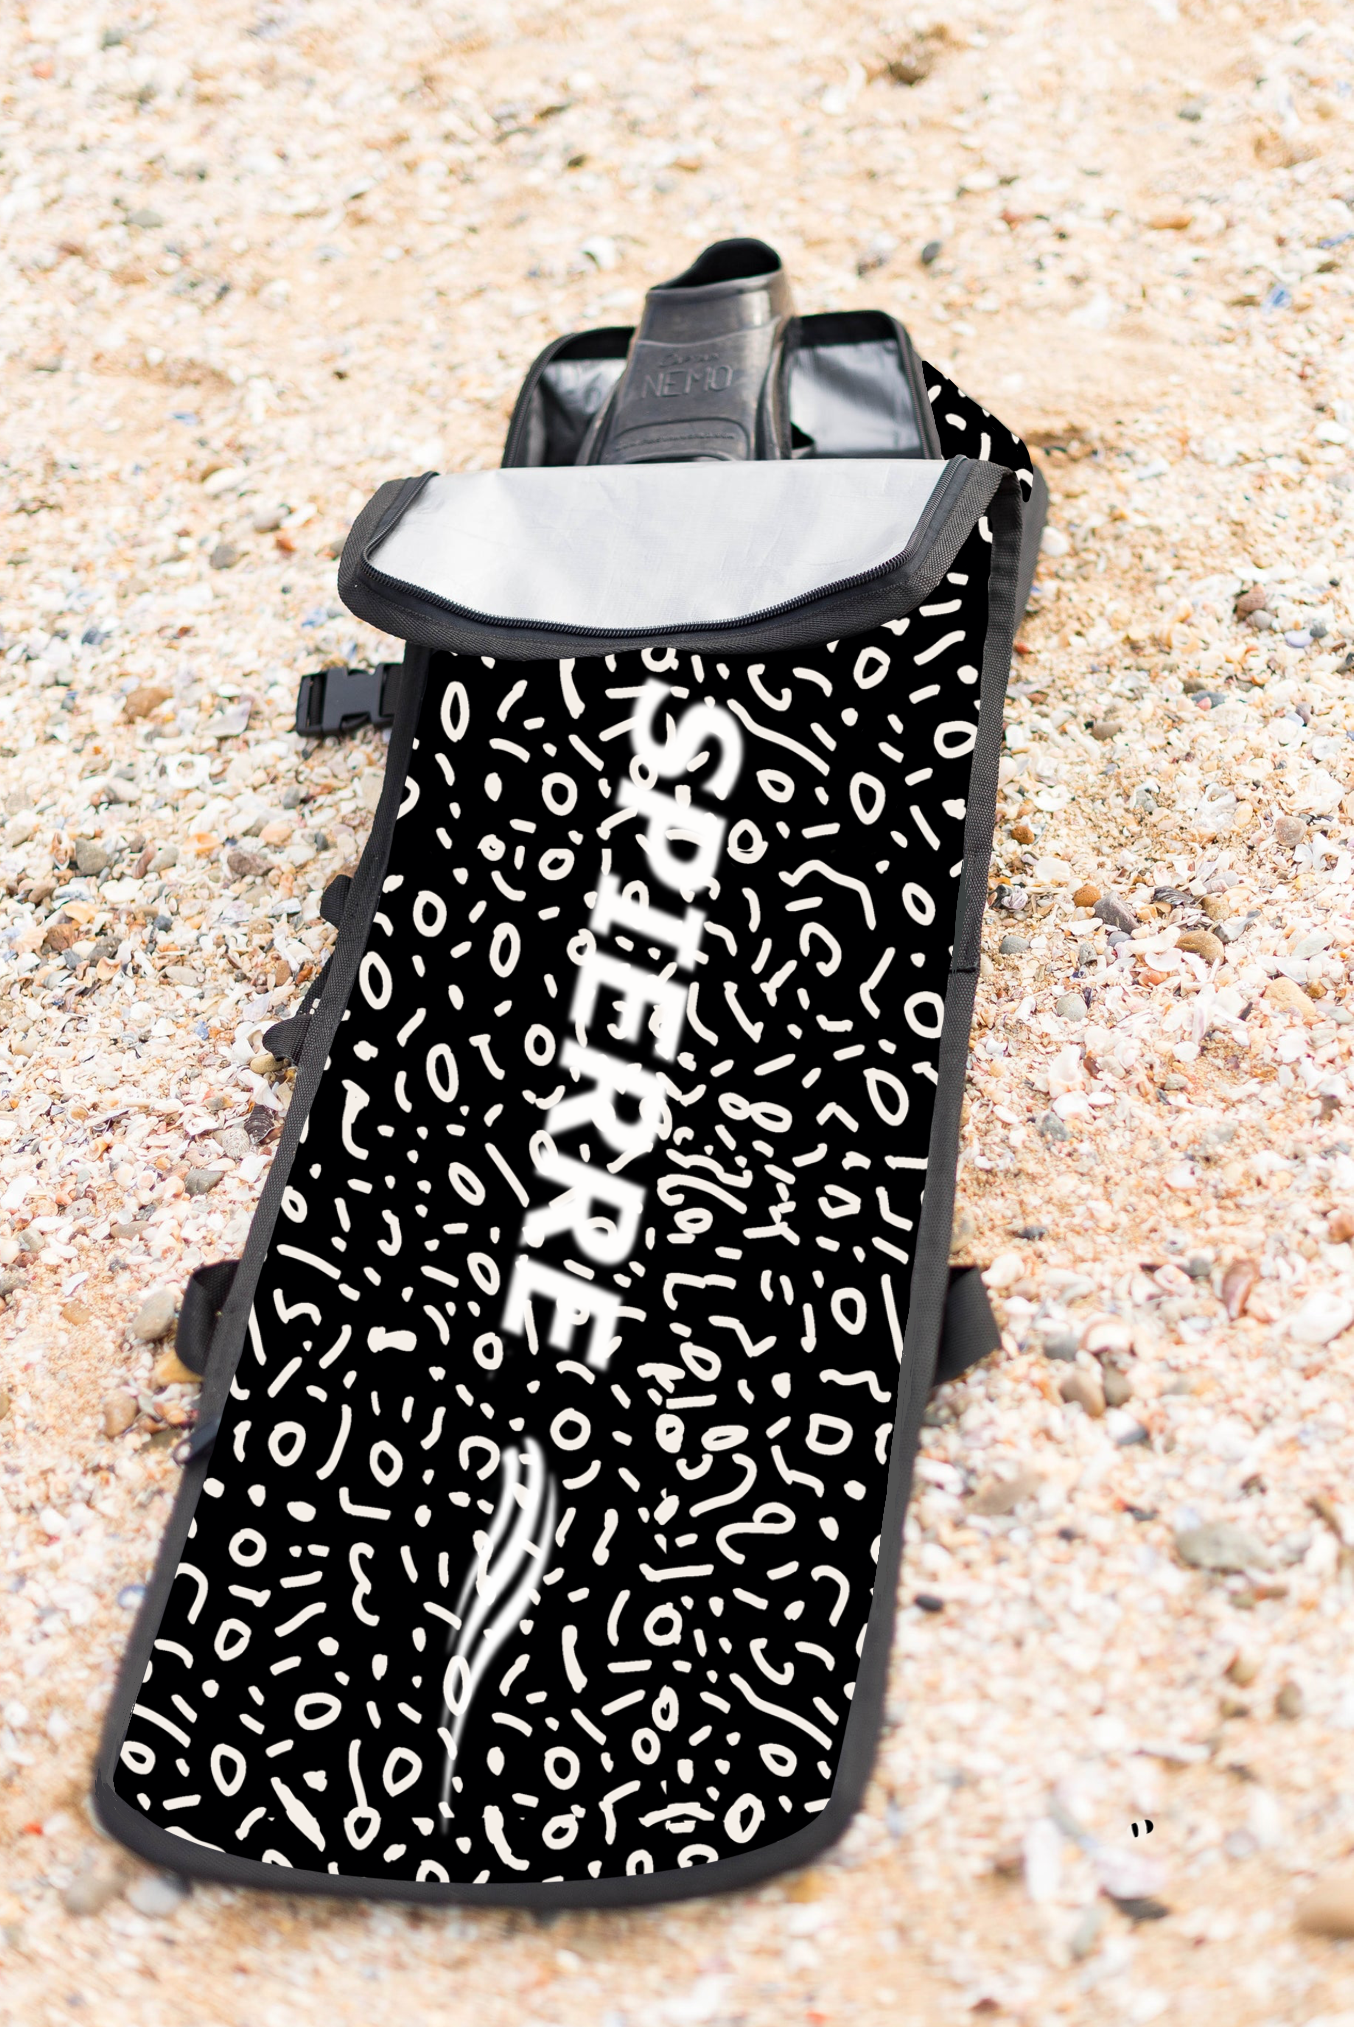 Spierre Padded Travel Fin Bag - Eagle Ray